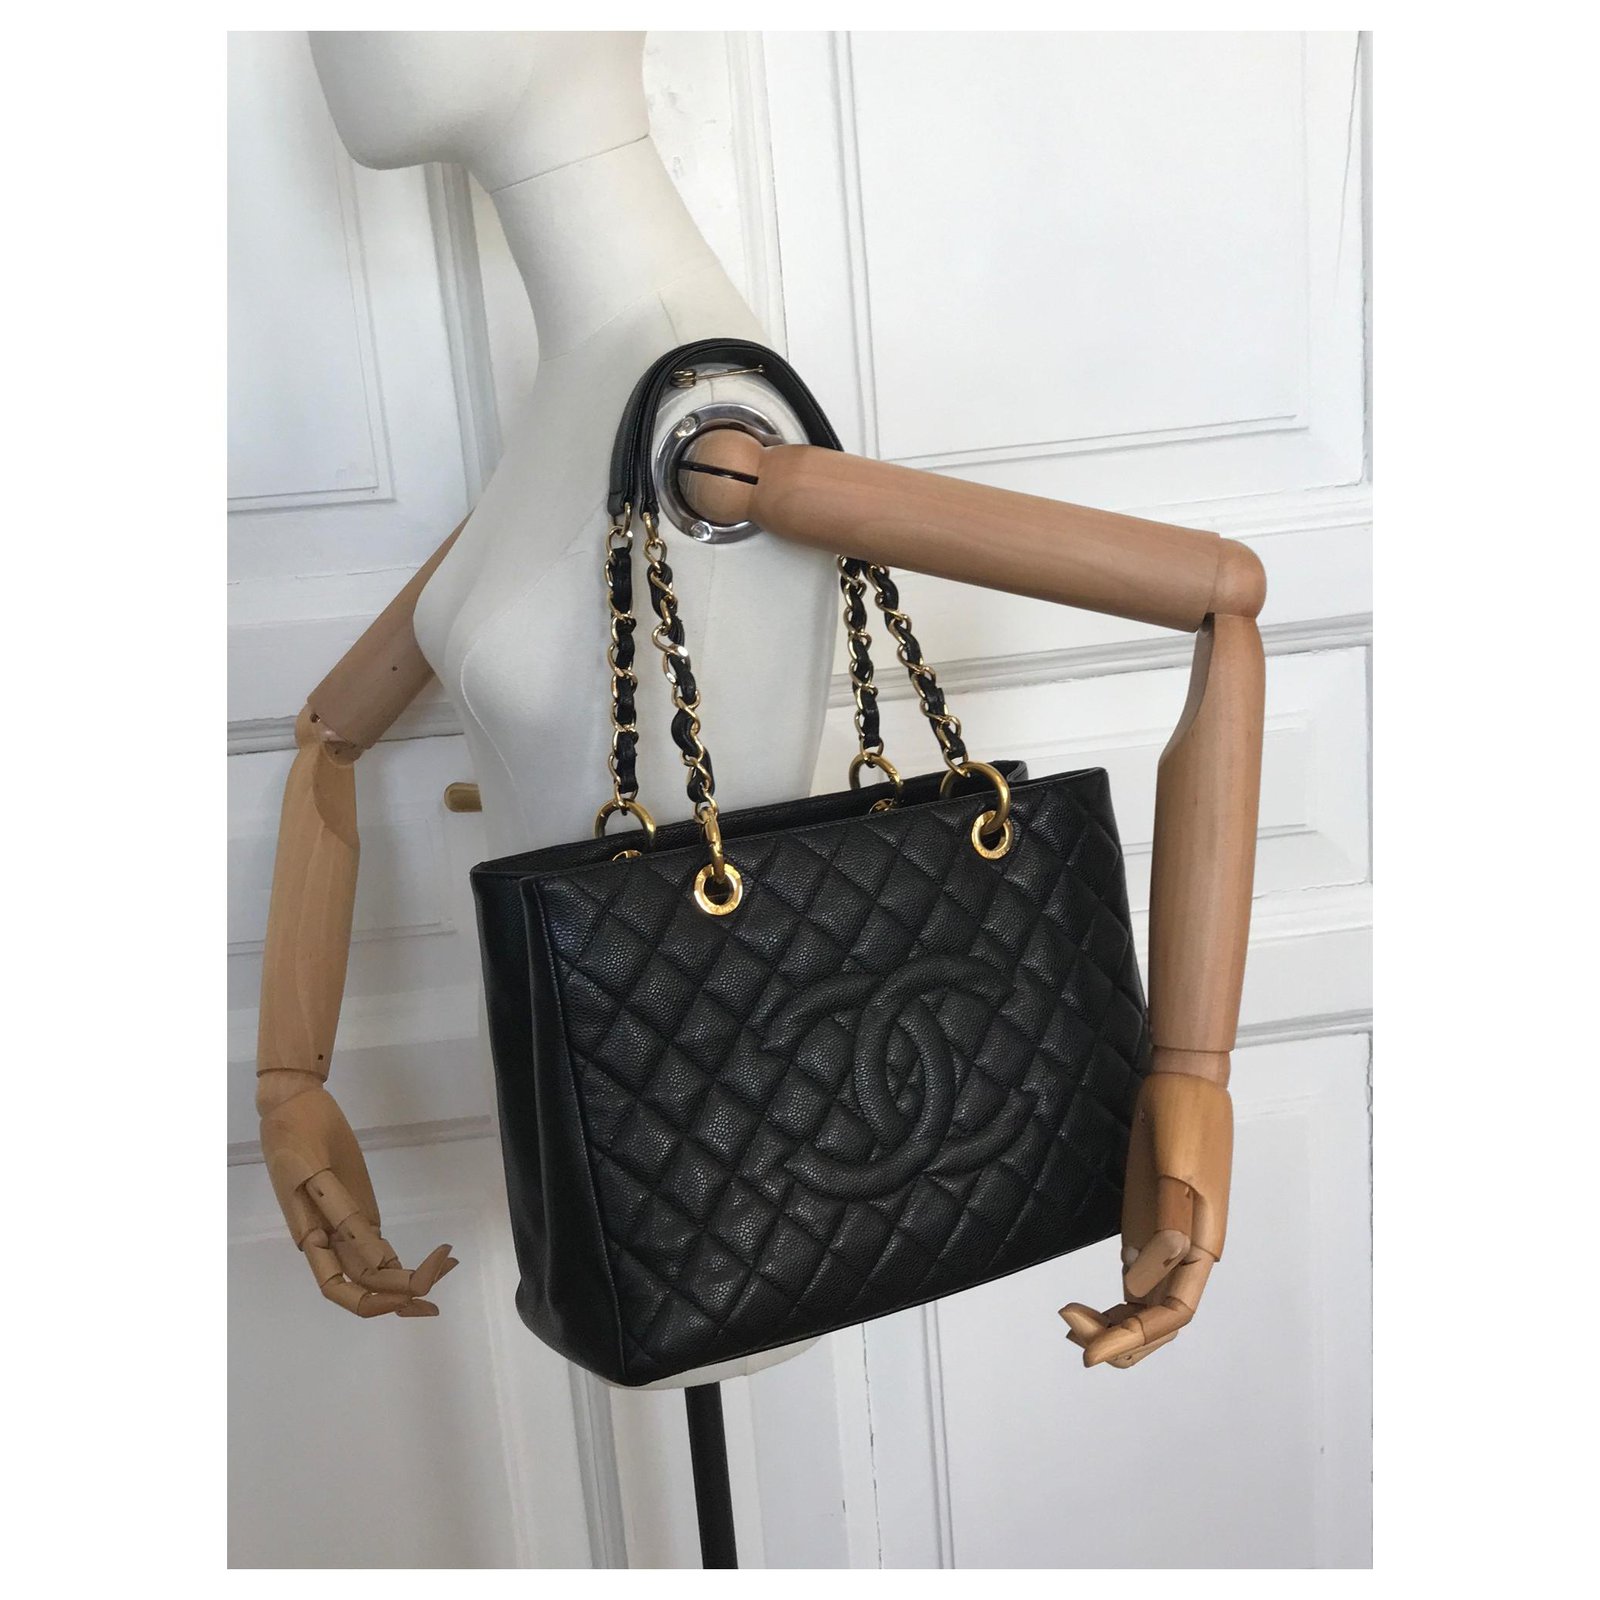 Timeless Chanel GST Grand Shopping Tote Bag in black caviar